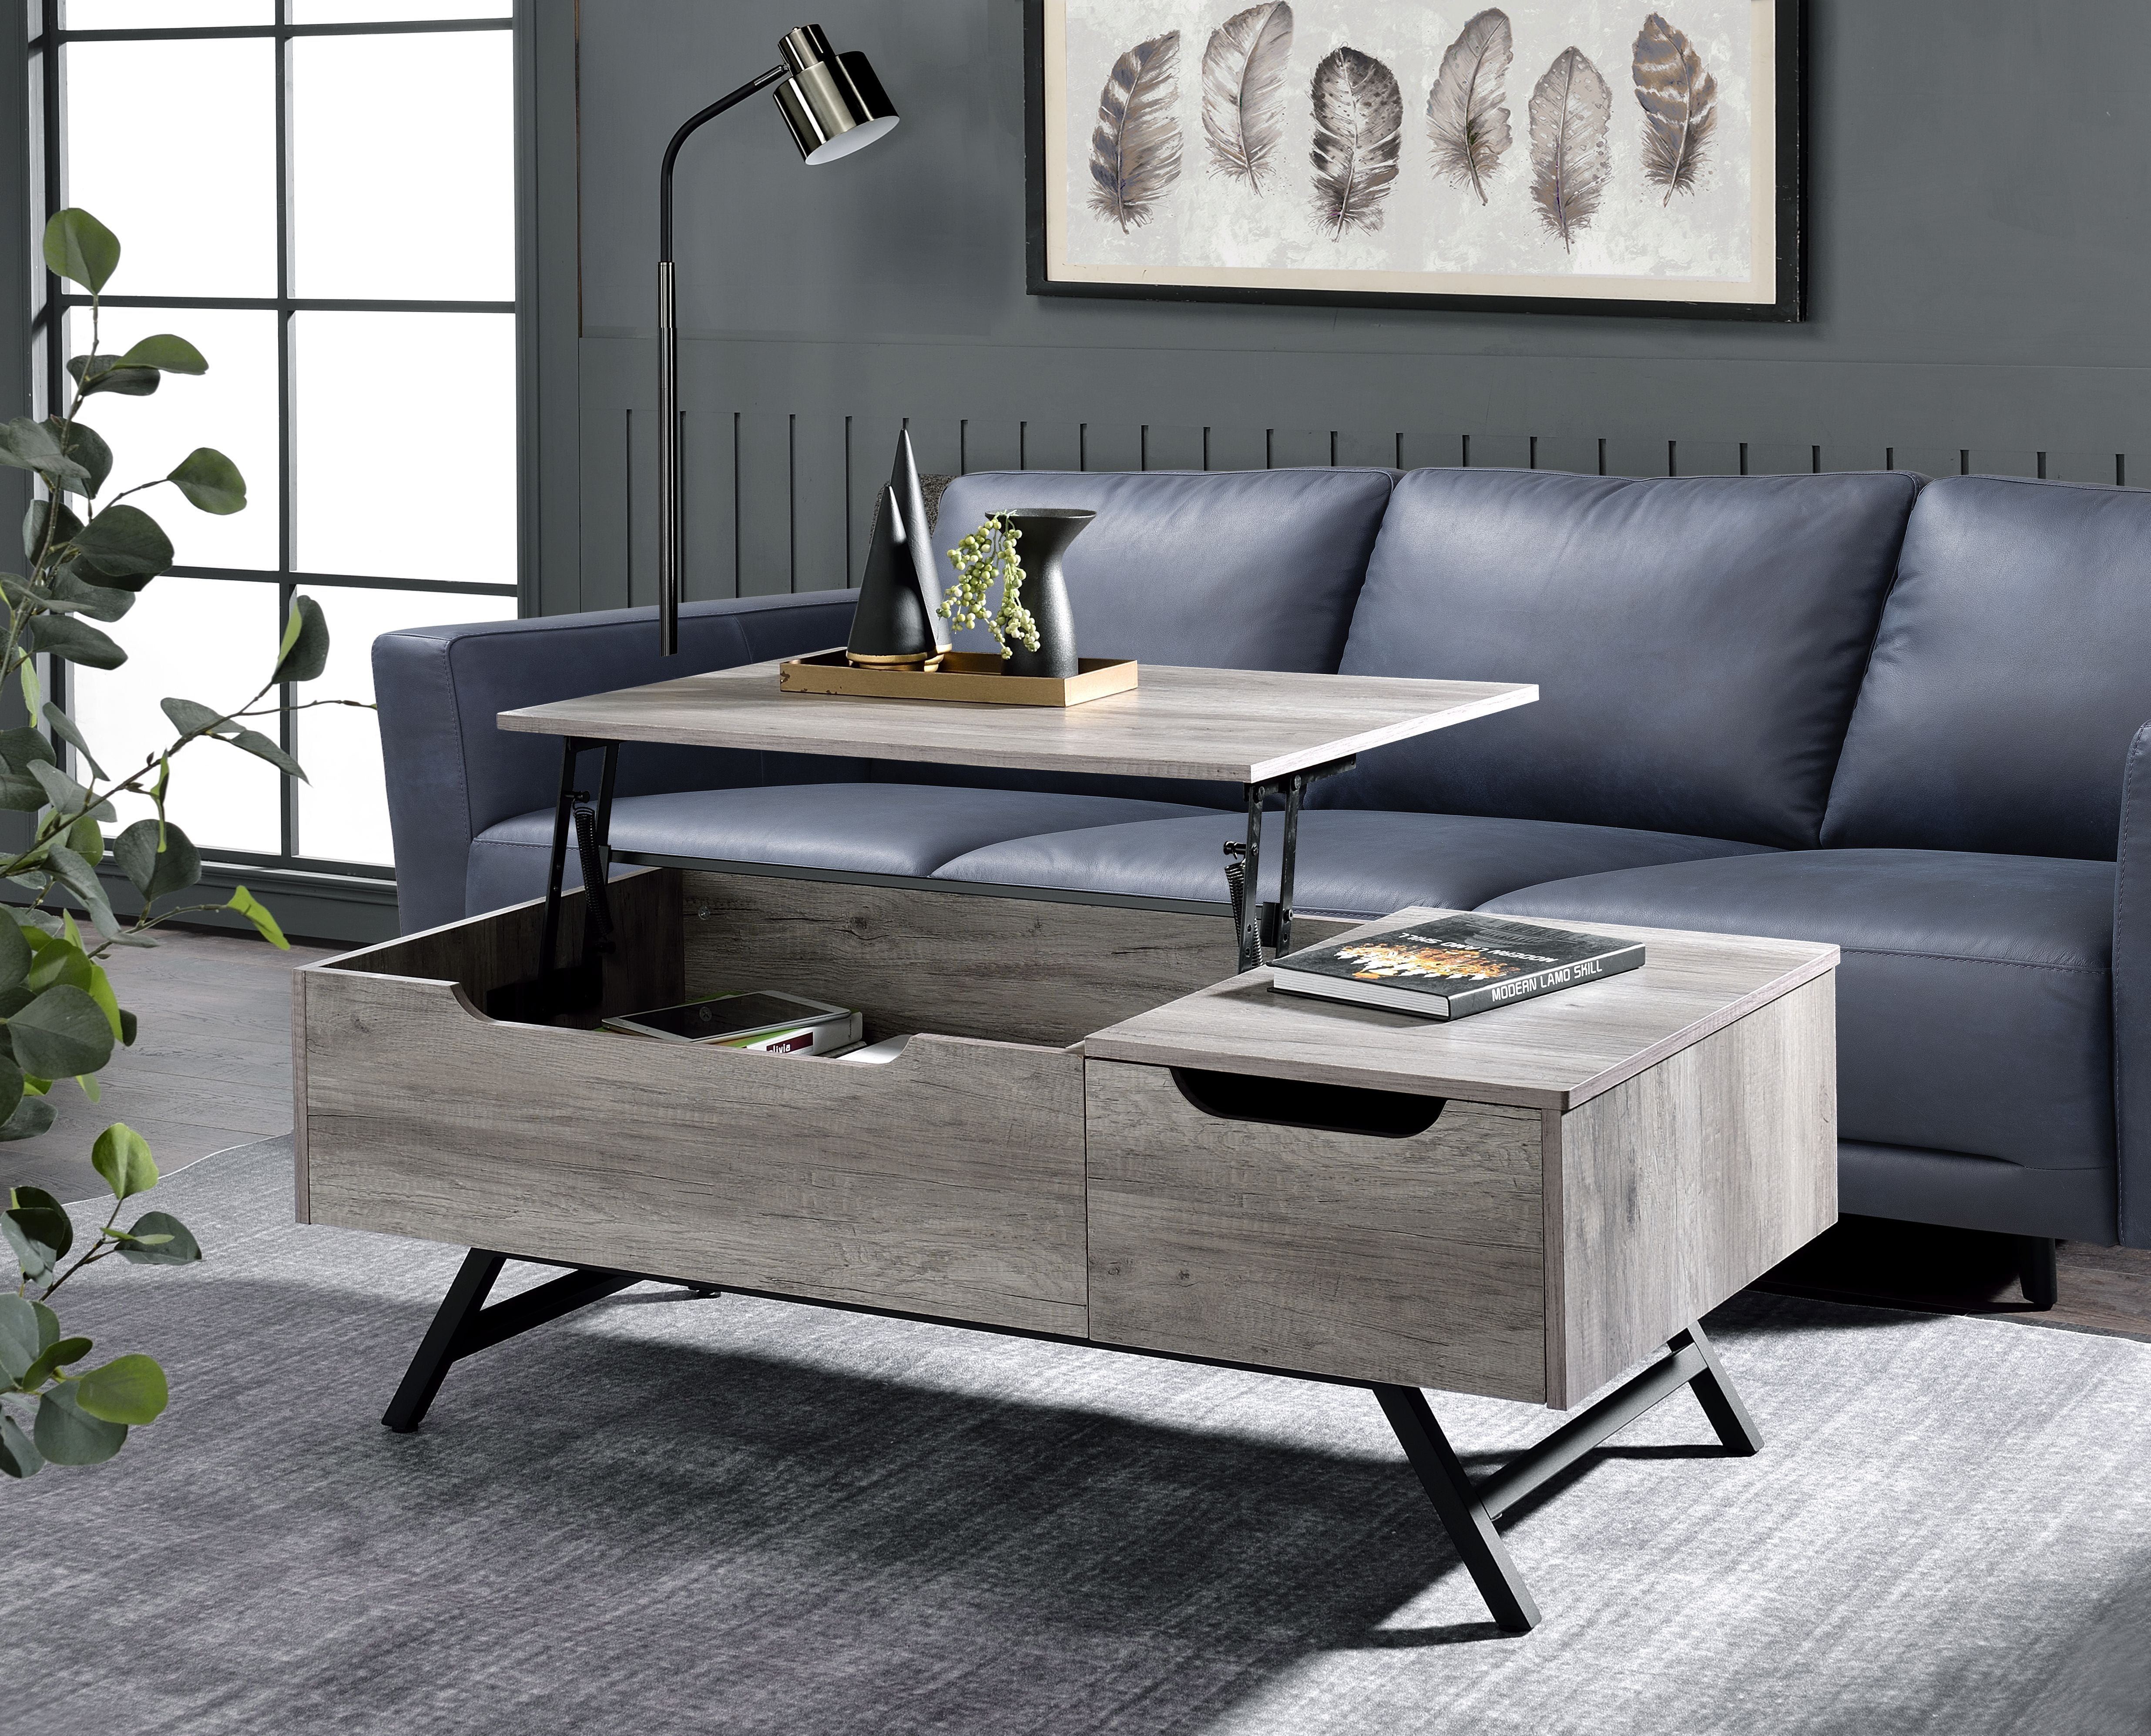 Picture of Acme Furniture LV00832 48 x 23 x 24 in. Throm Coffee Table with Lift Top, Gray Oak